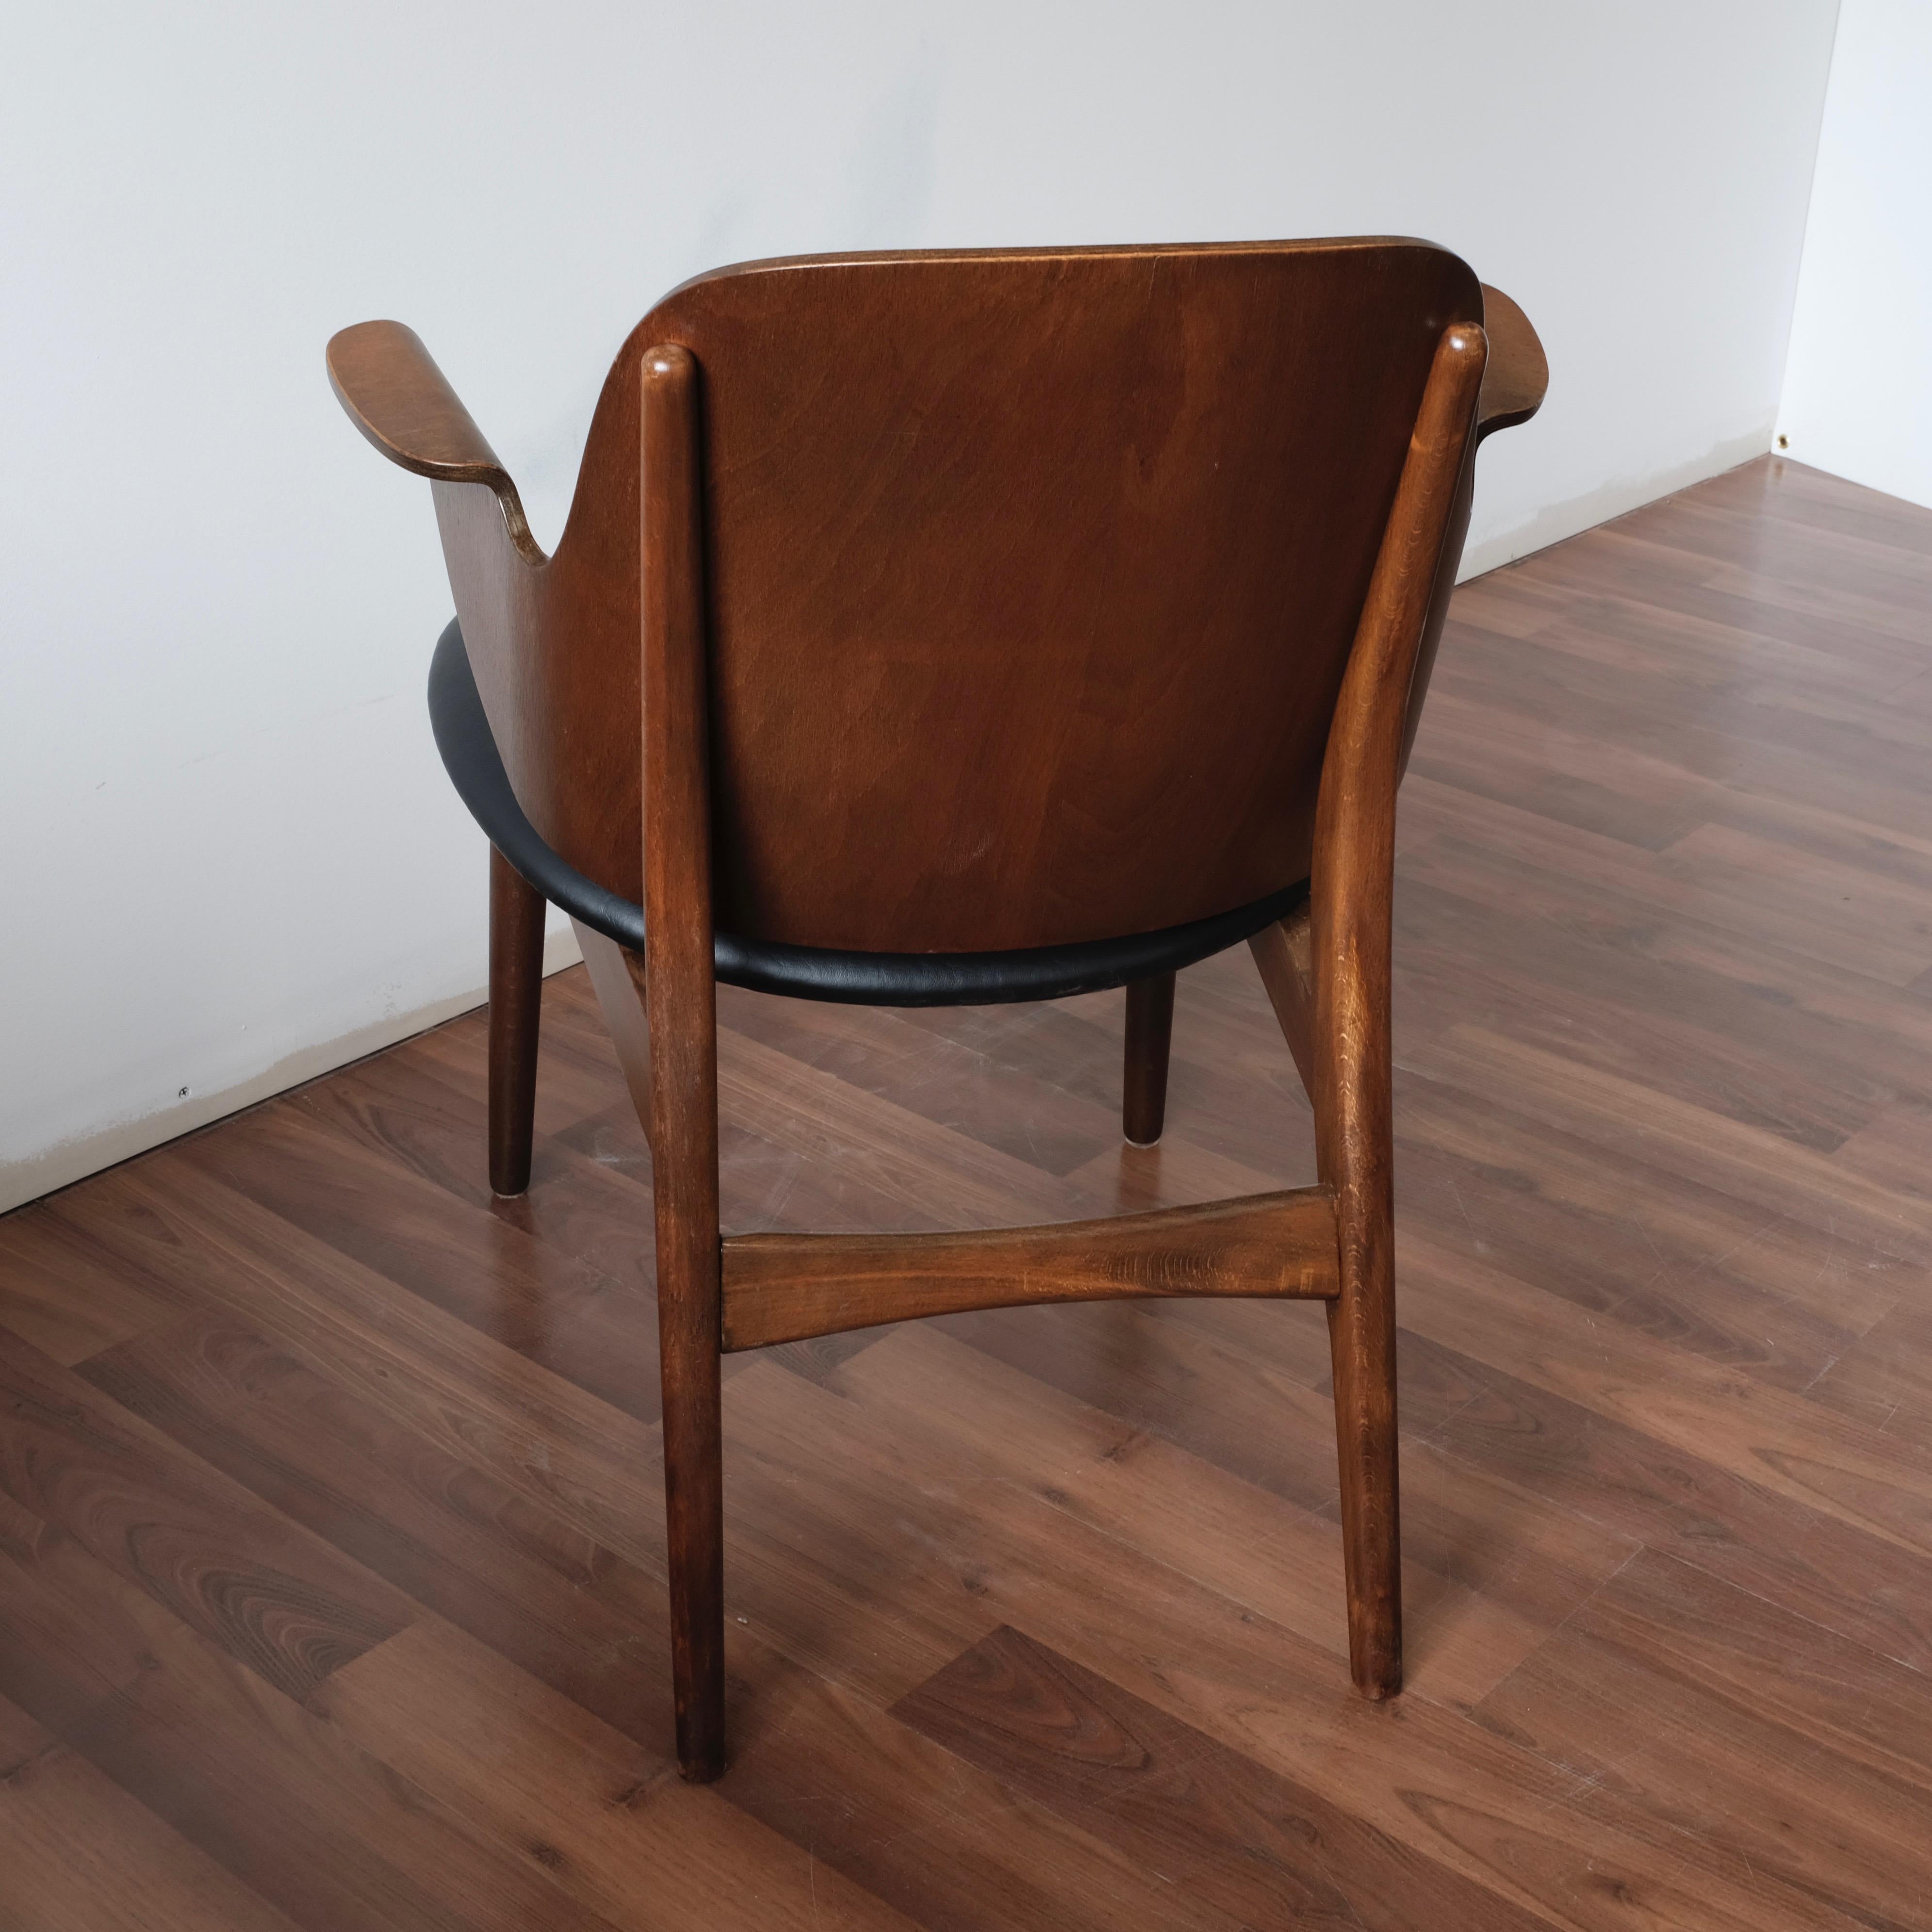 Model 107 armchair designed by Hans Olsen and made in Denmark by Bramin Møbler.

Solid beech frame with bent plywood shell seat and back with integral armrests, finished in a teak/walnut stain. Seat and back reupholstered with black leatherette.